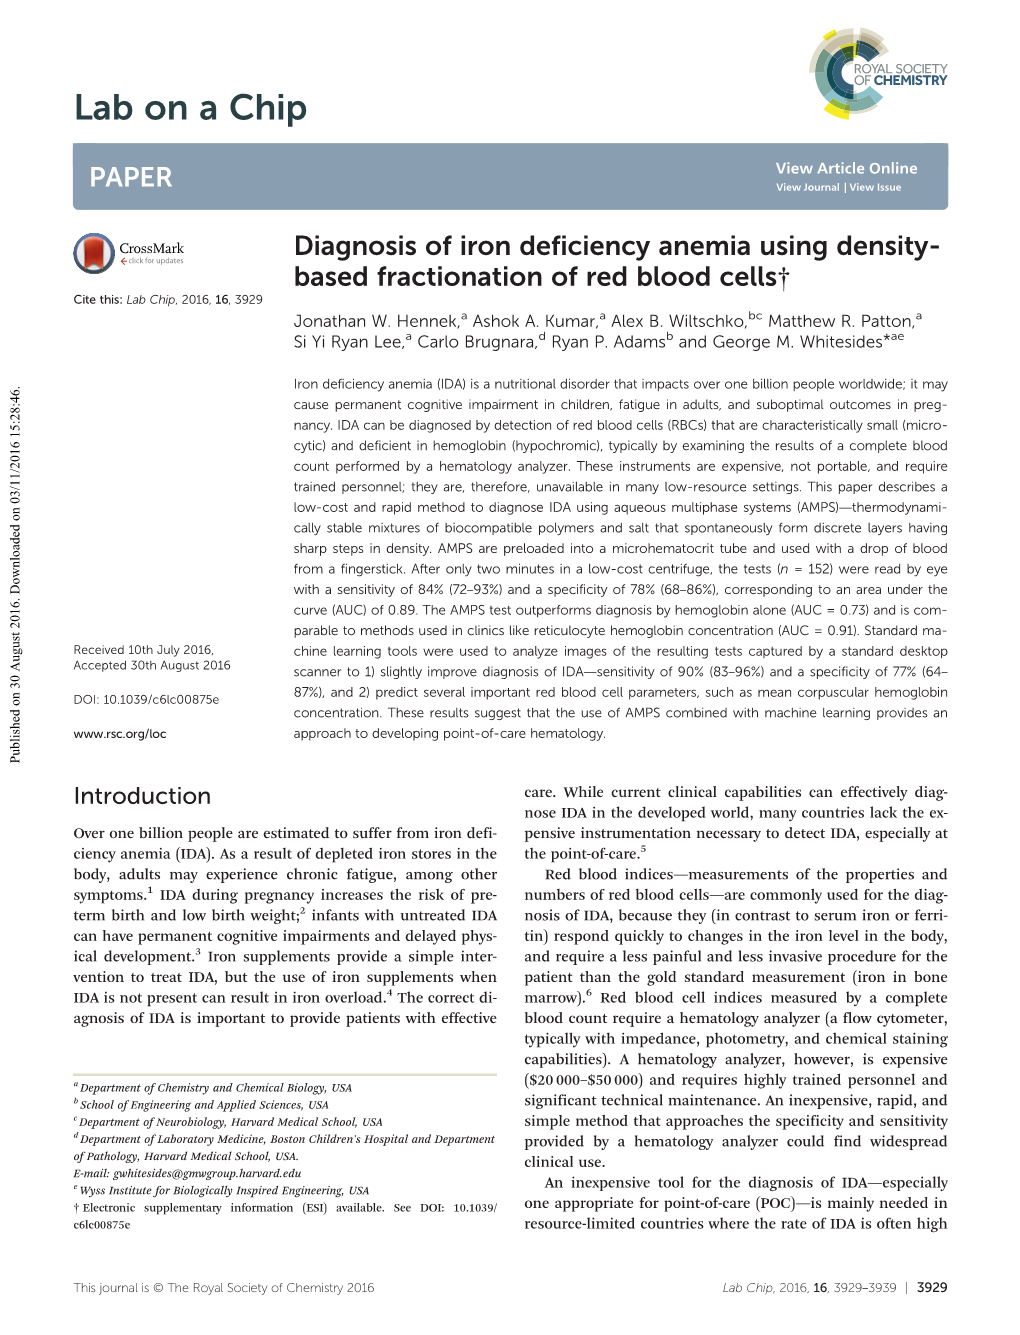 Diagnosis of Iron Deficiency Anemia Using Density-Based Fractionation Of